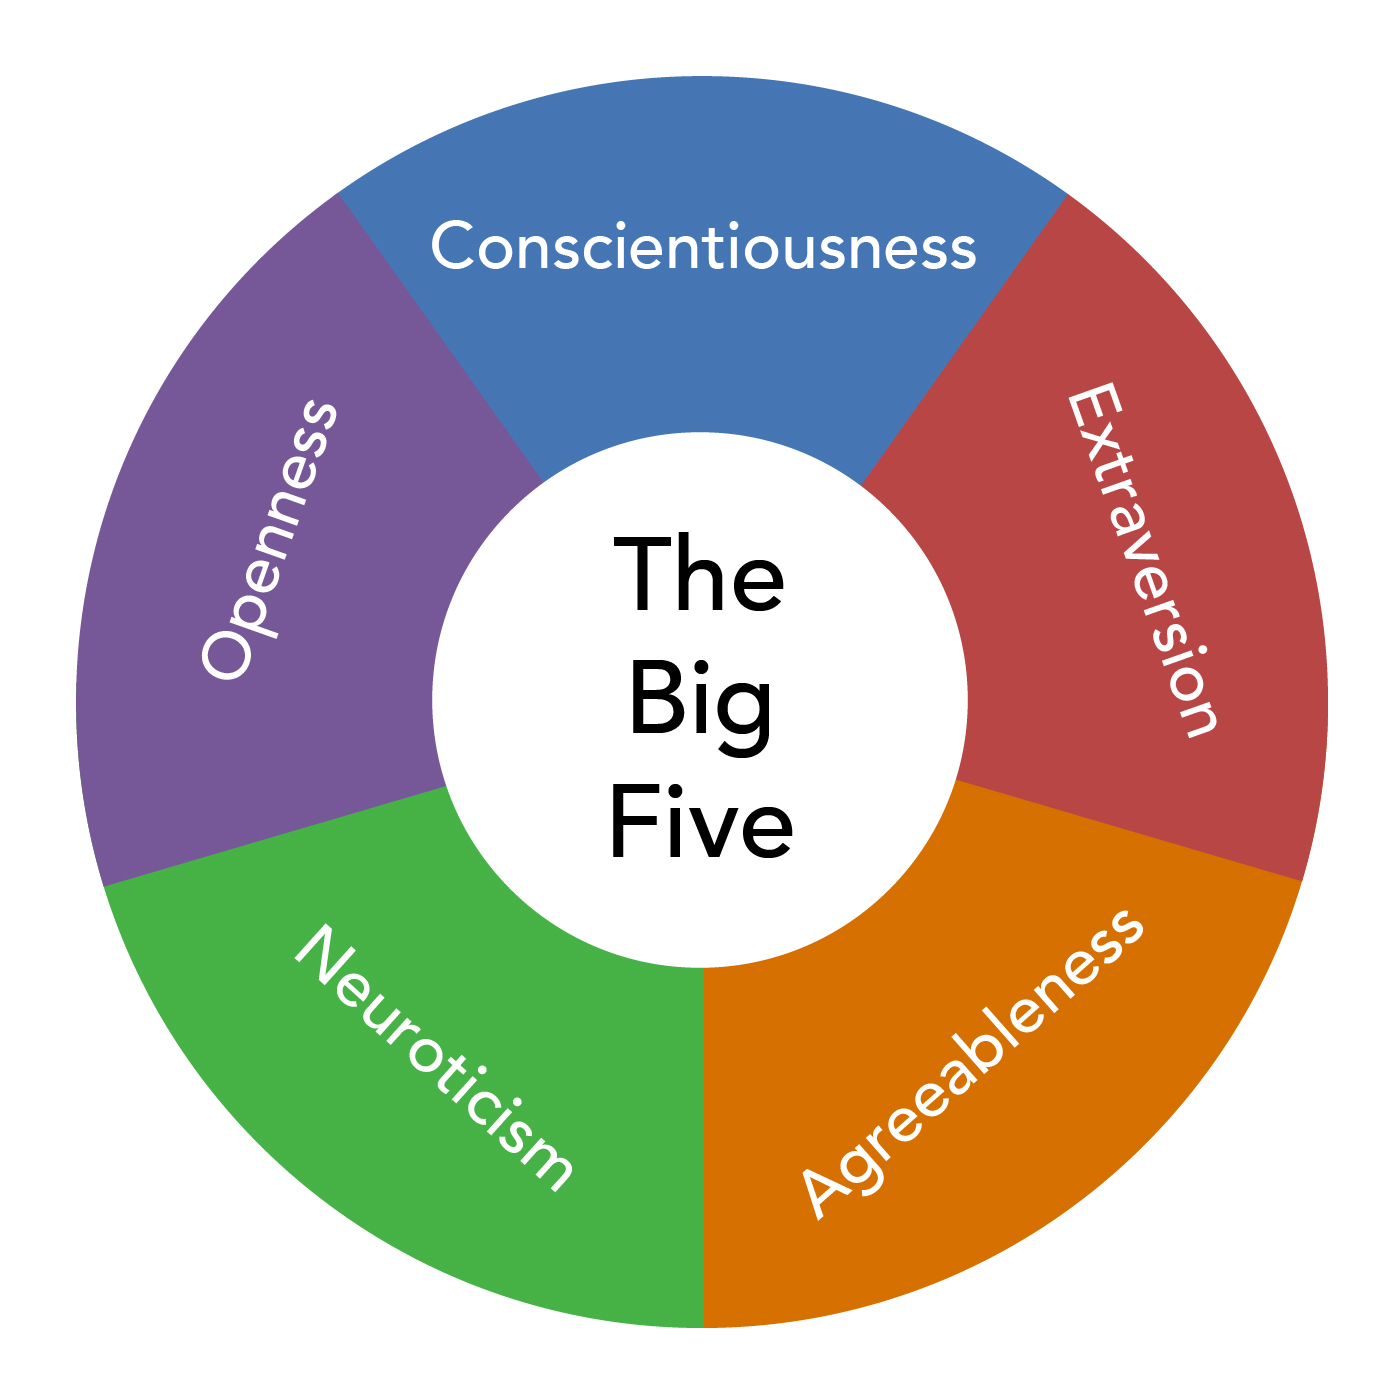 A circle with five segments. The segments are labelled with the big five personality traits: openness, conscientiousness, extraversion, agreeableness, and neuroticism.